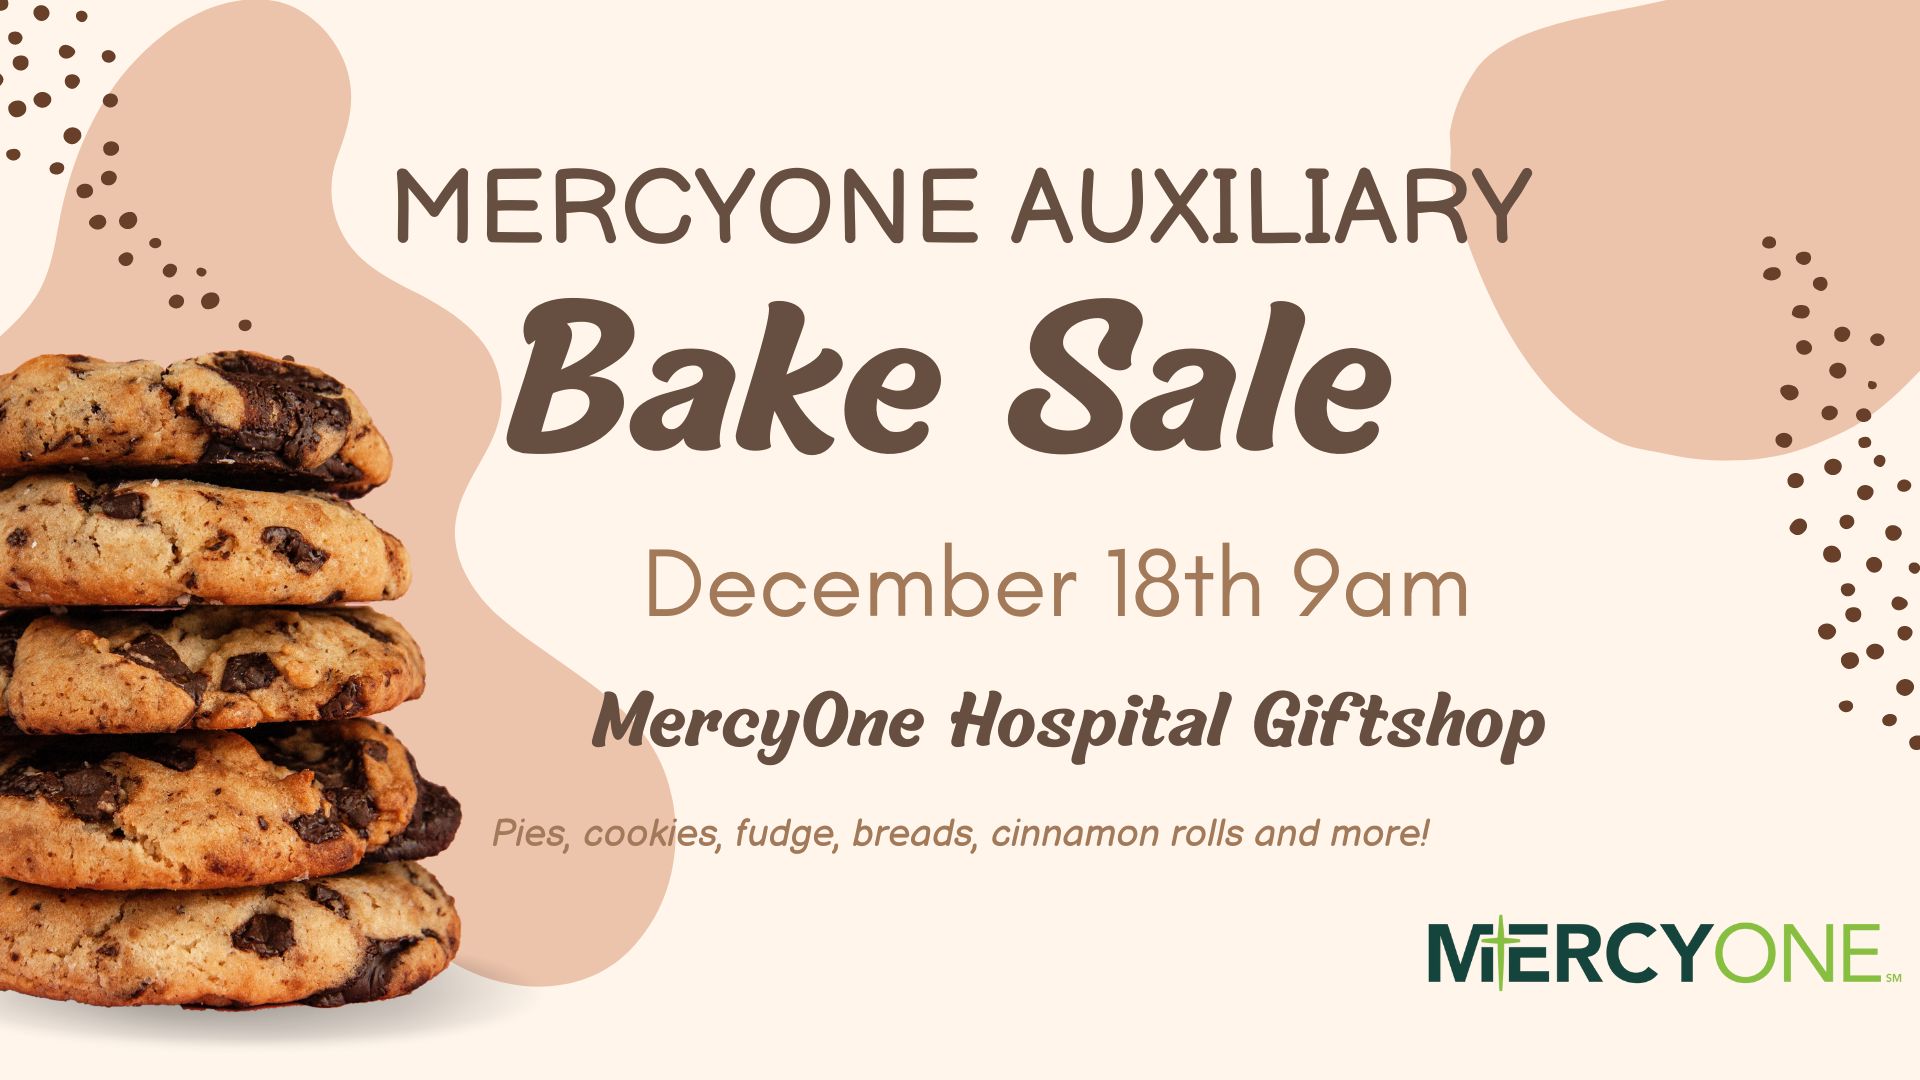 MercyOne Auxiliary Bake Sale December 18th